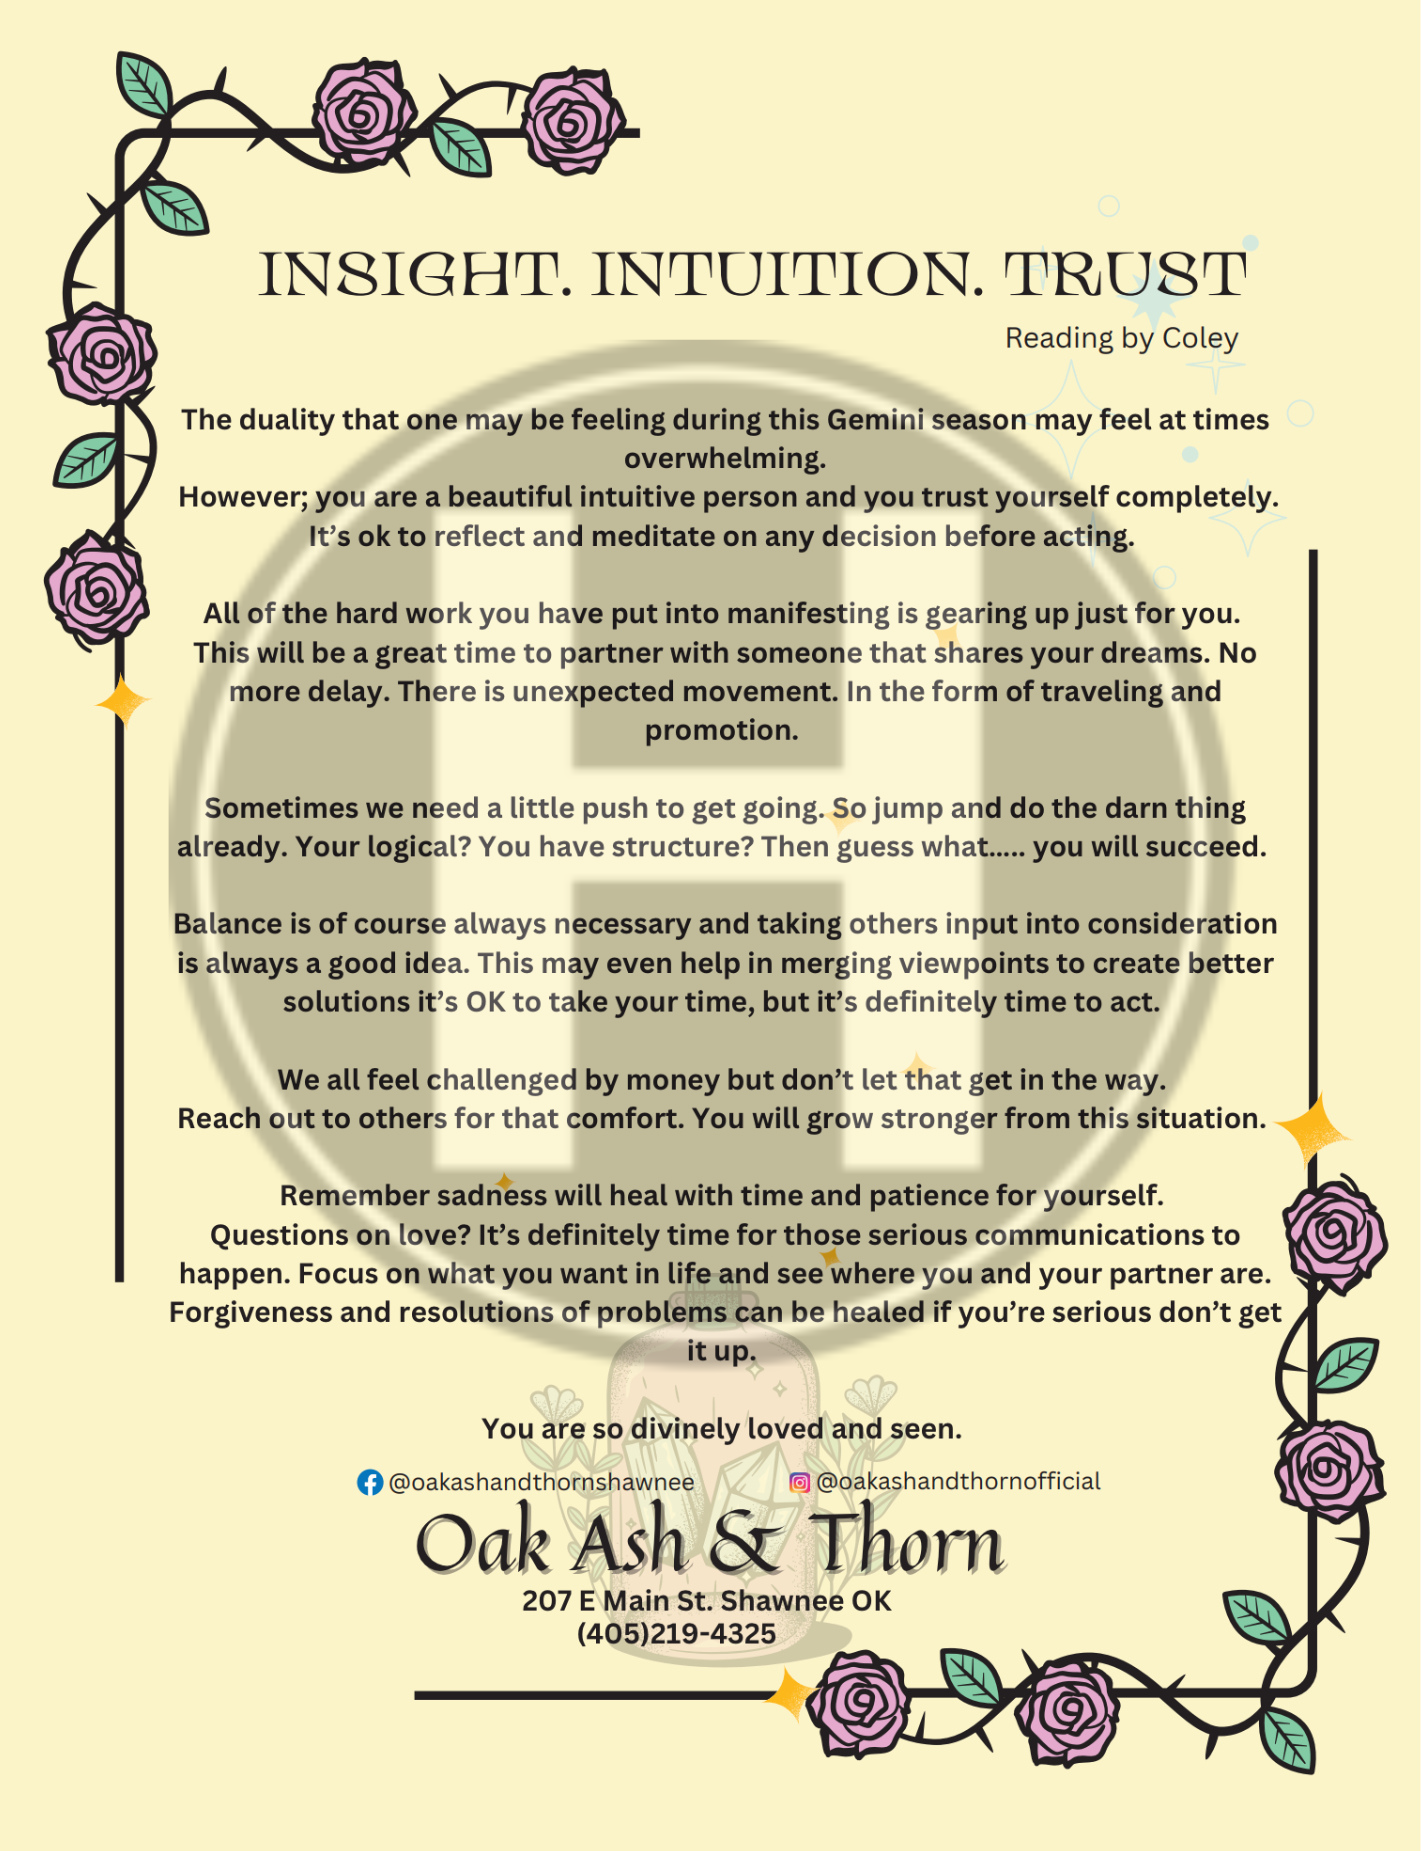 Insight. Intuition. Trust.